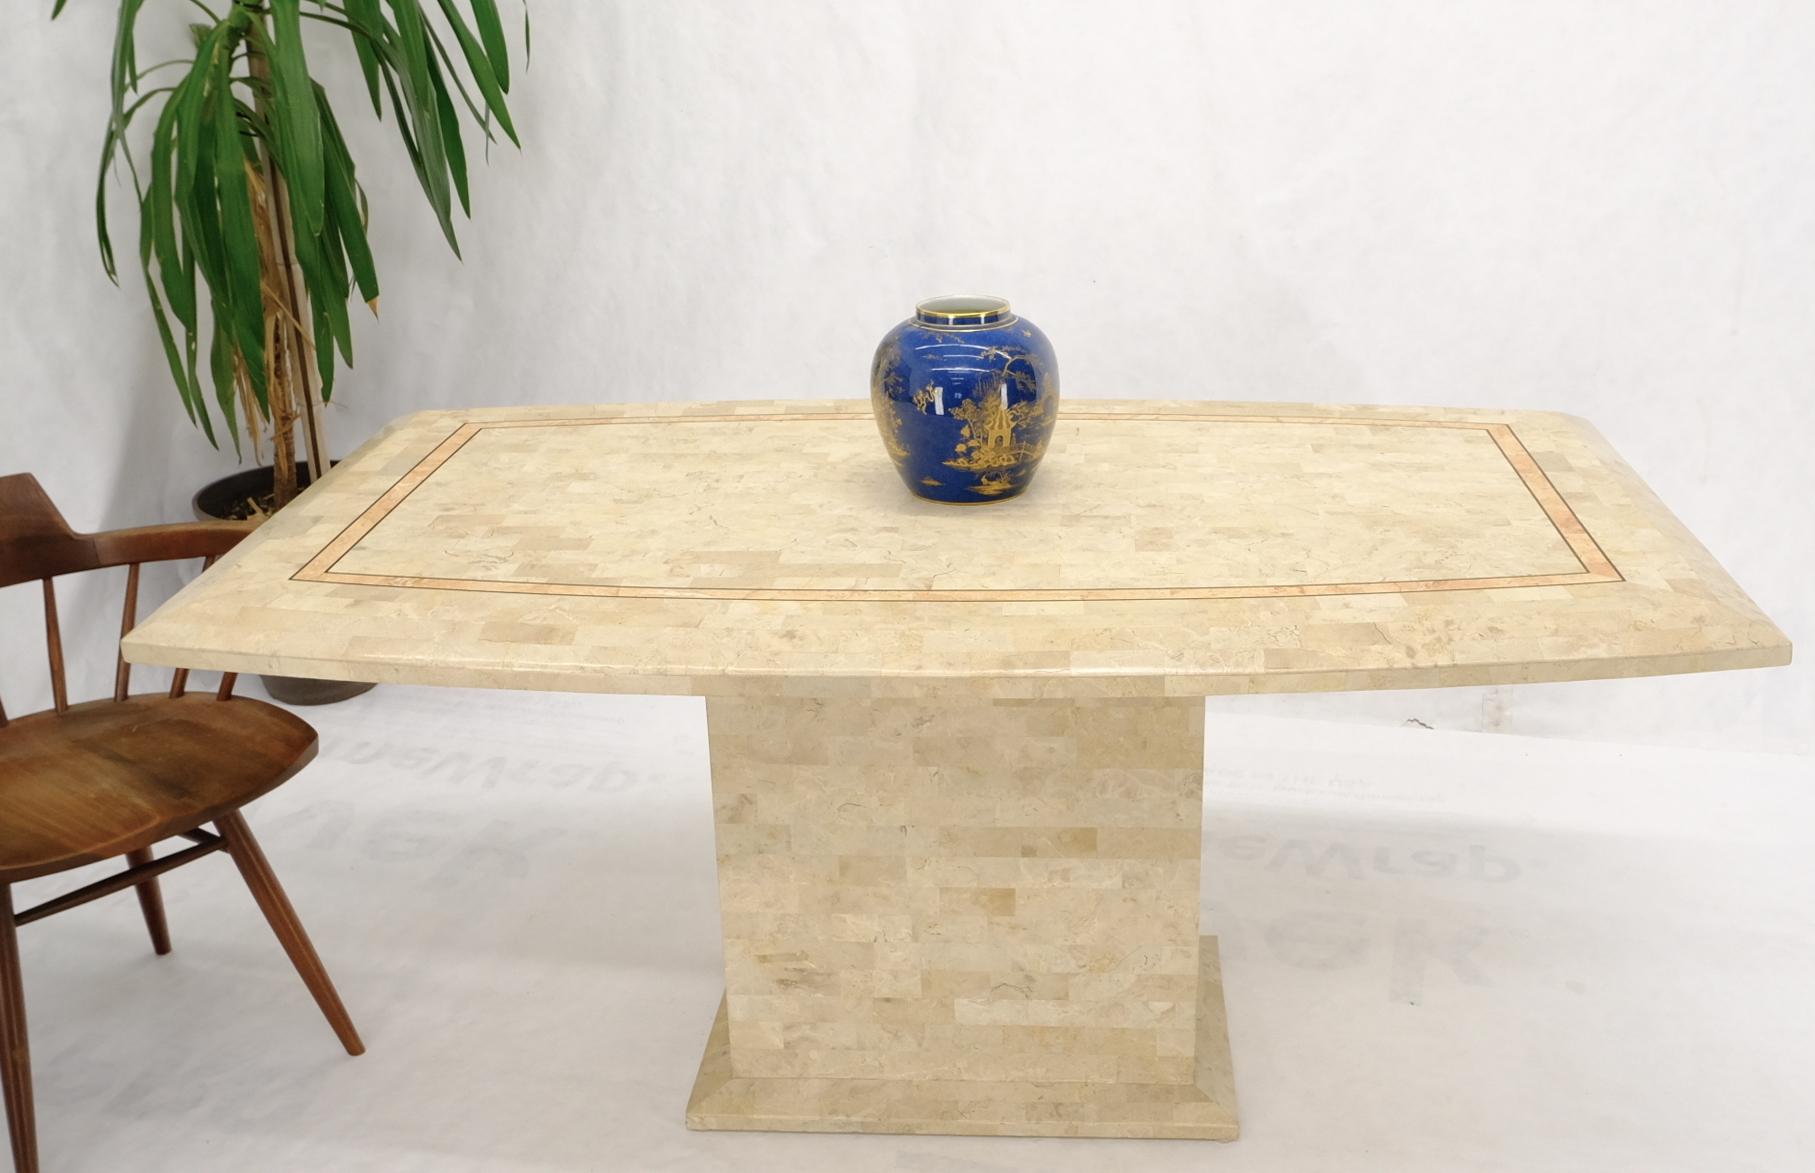 Philippine Tessellated Stone Tile Mid-Century Modern Boat Shape Dining Table For Sale